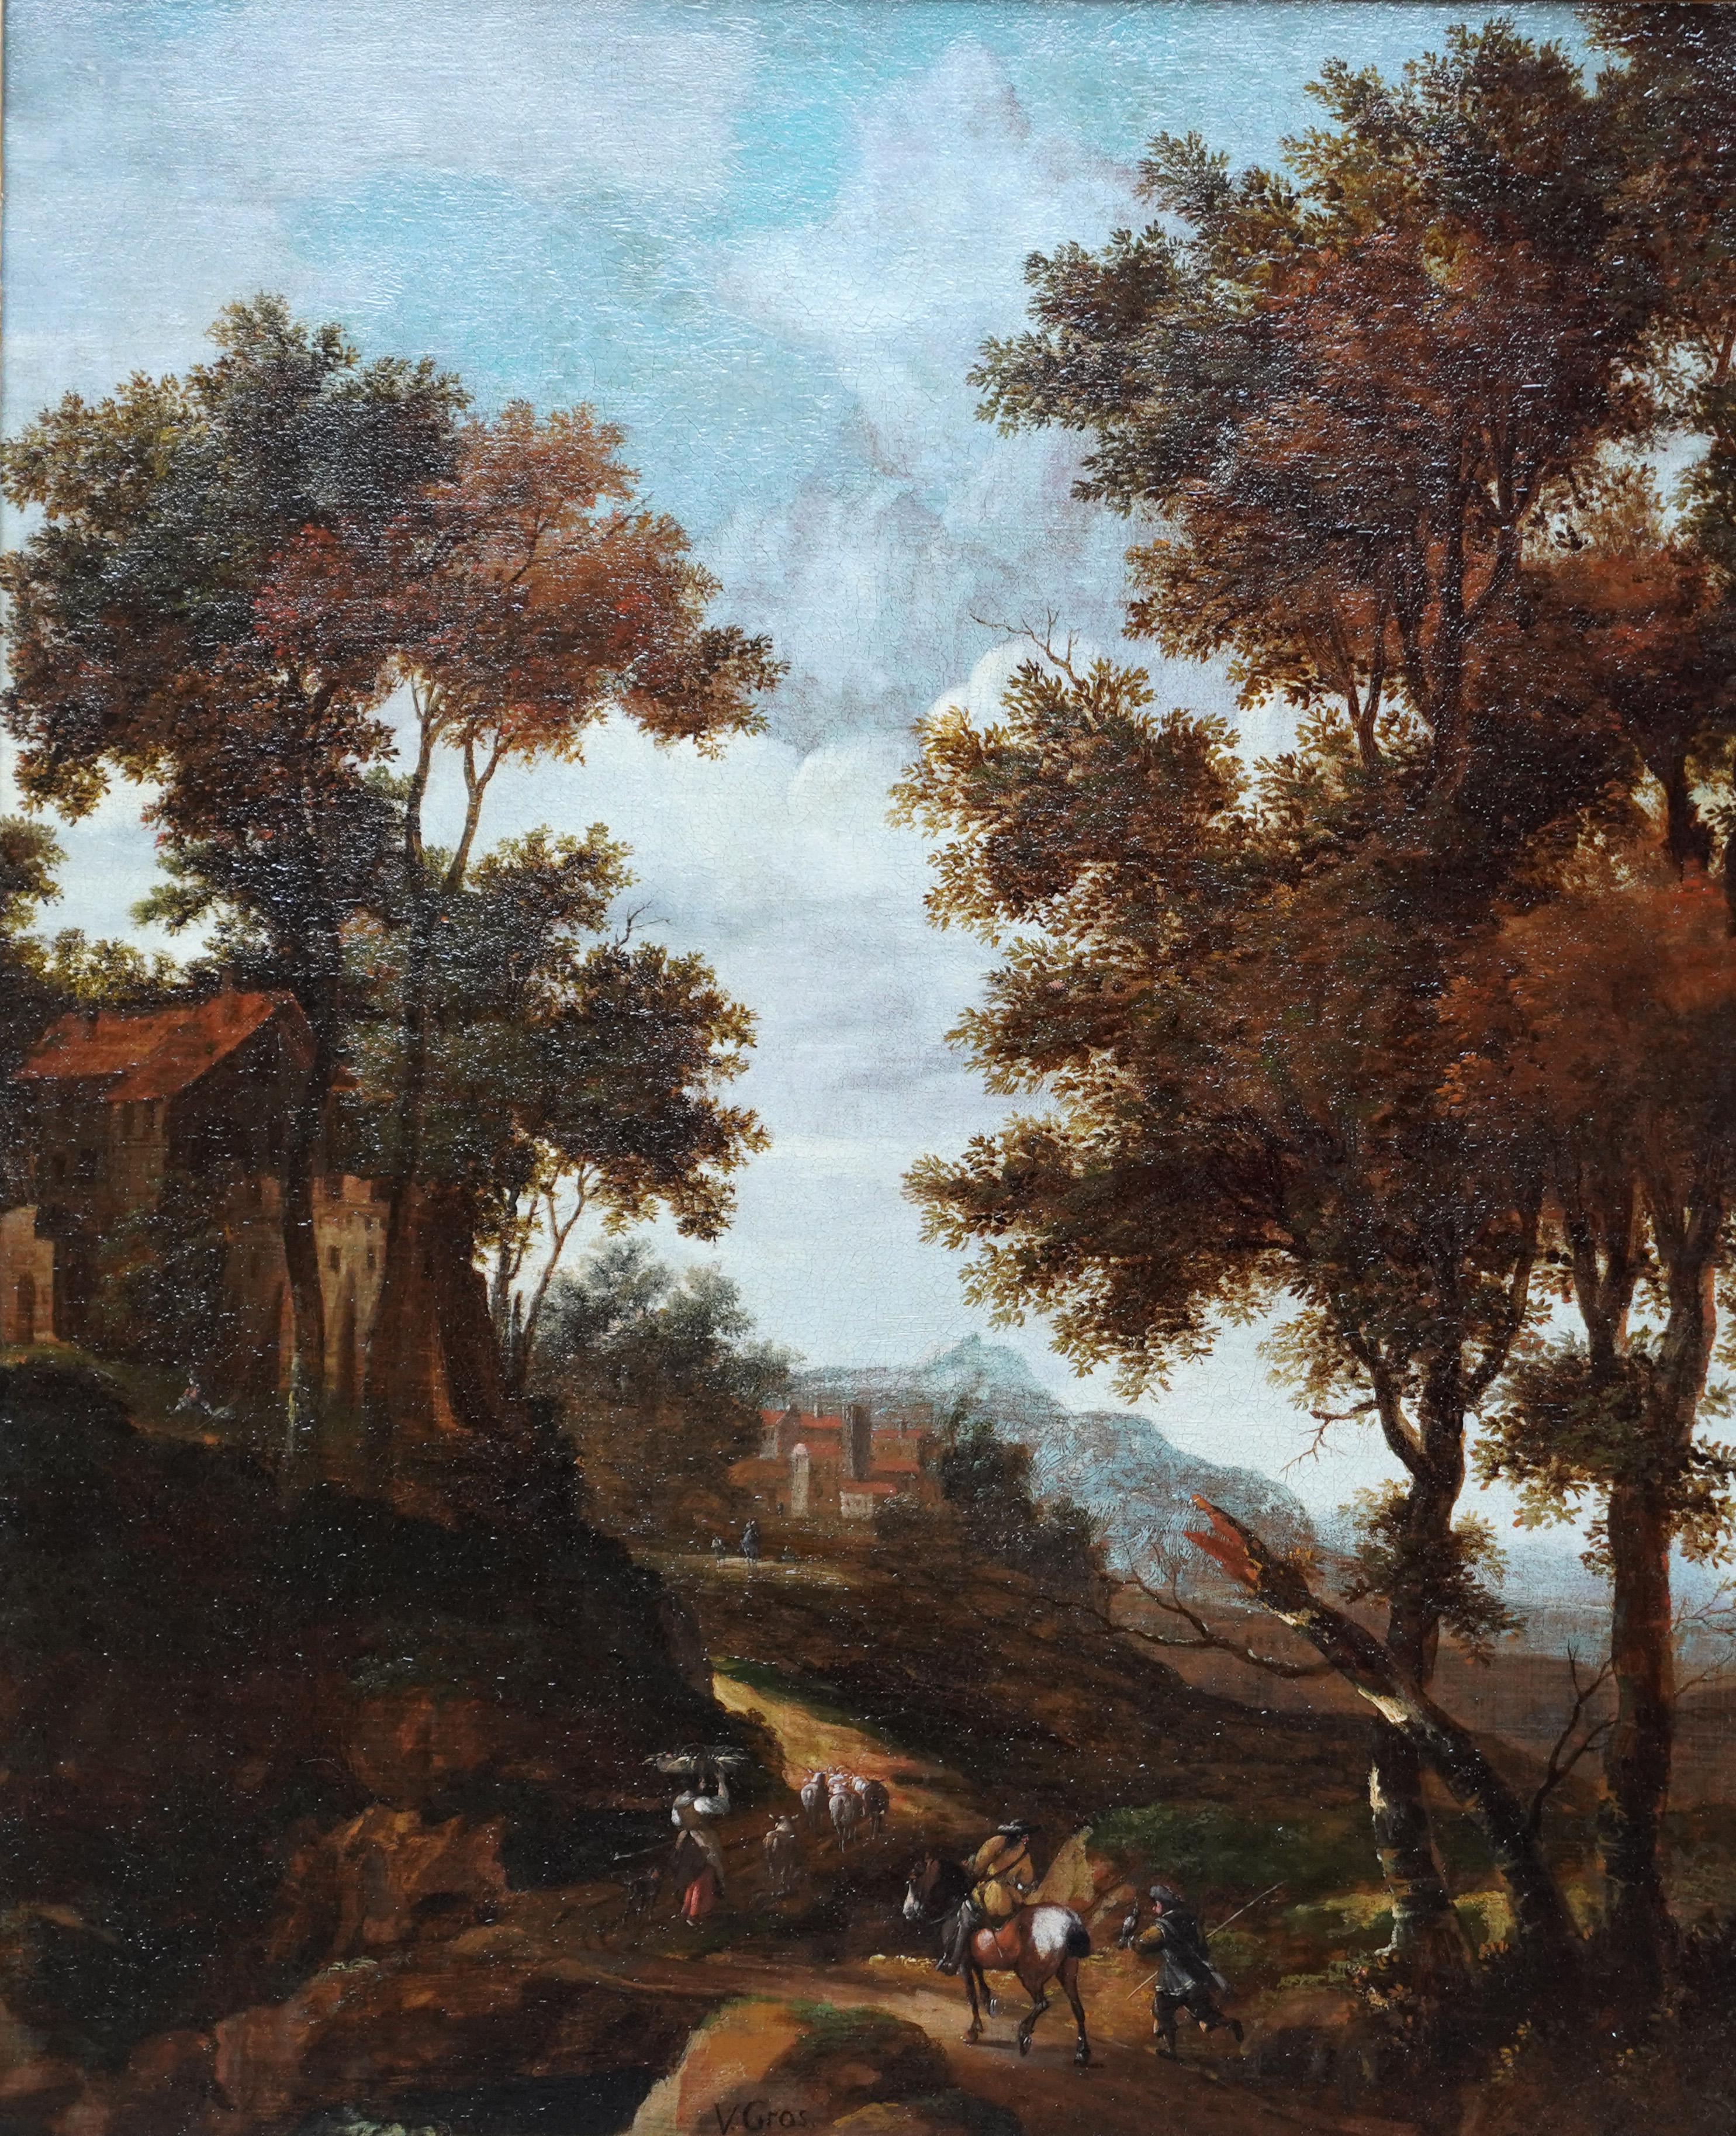 Italian Landscape with Travellers - Dutch Golden Age 17thC art oil painting For Sale 7